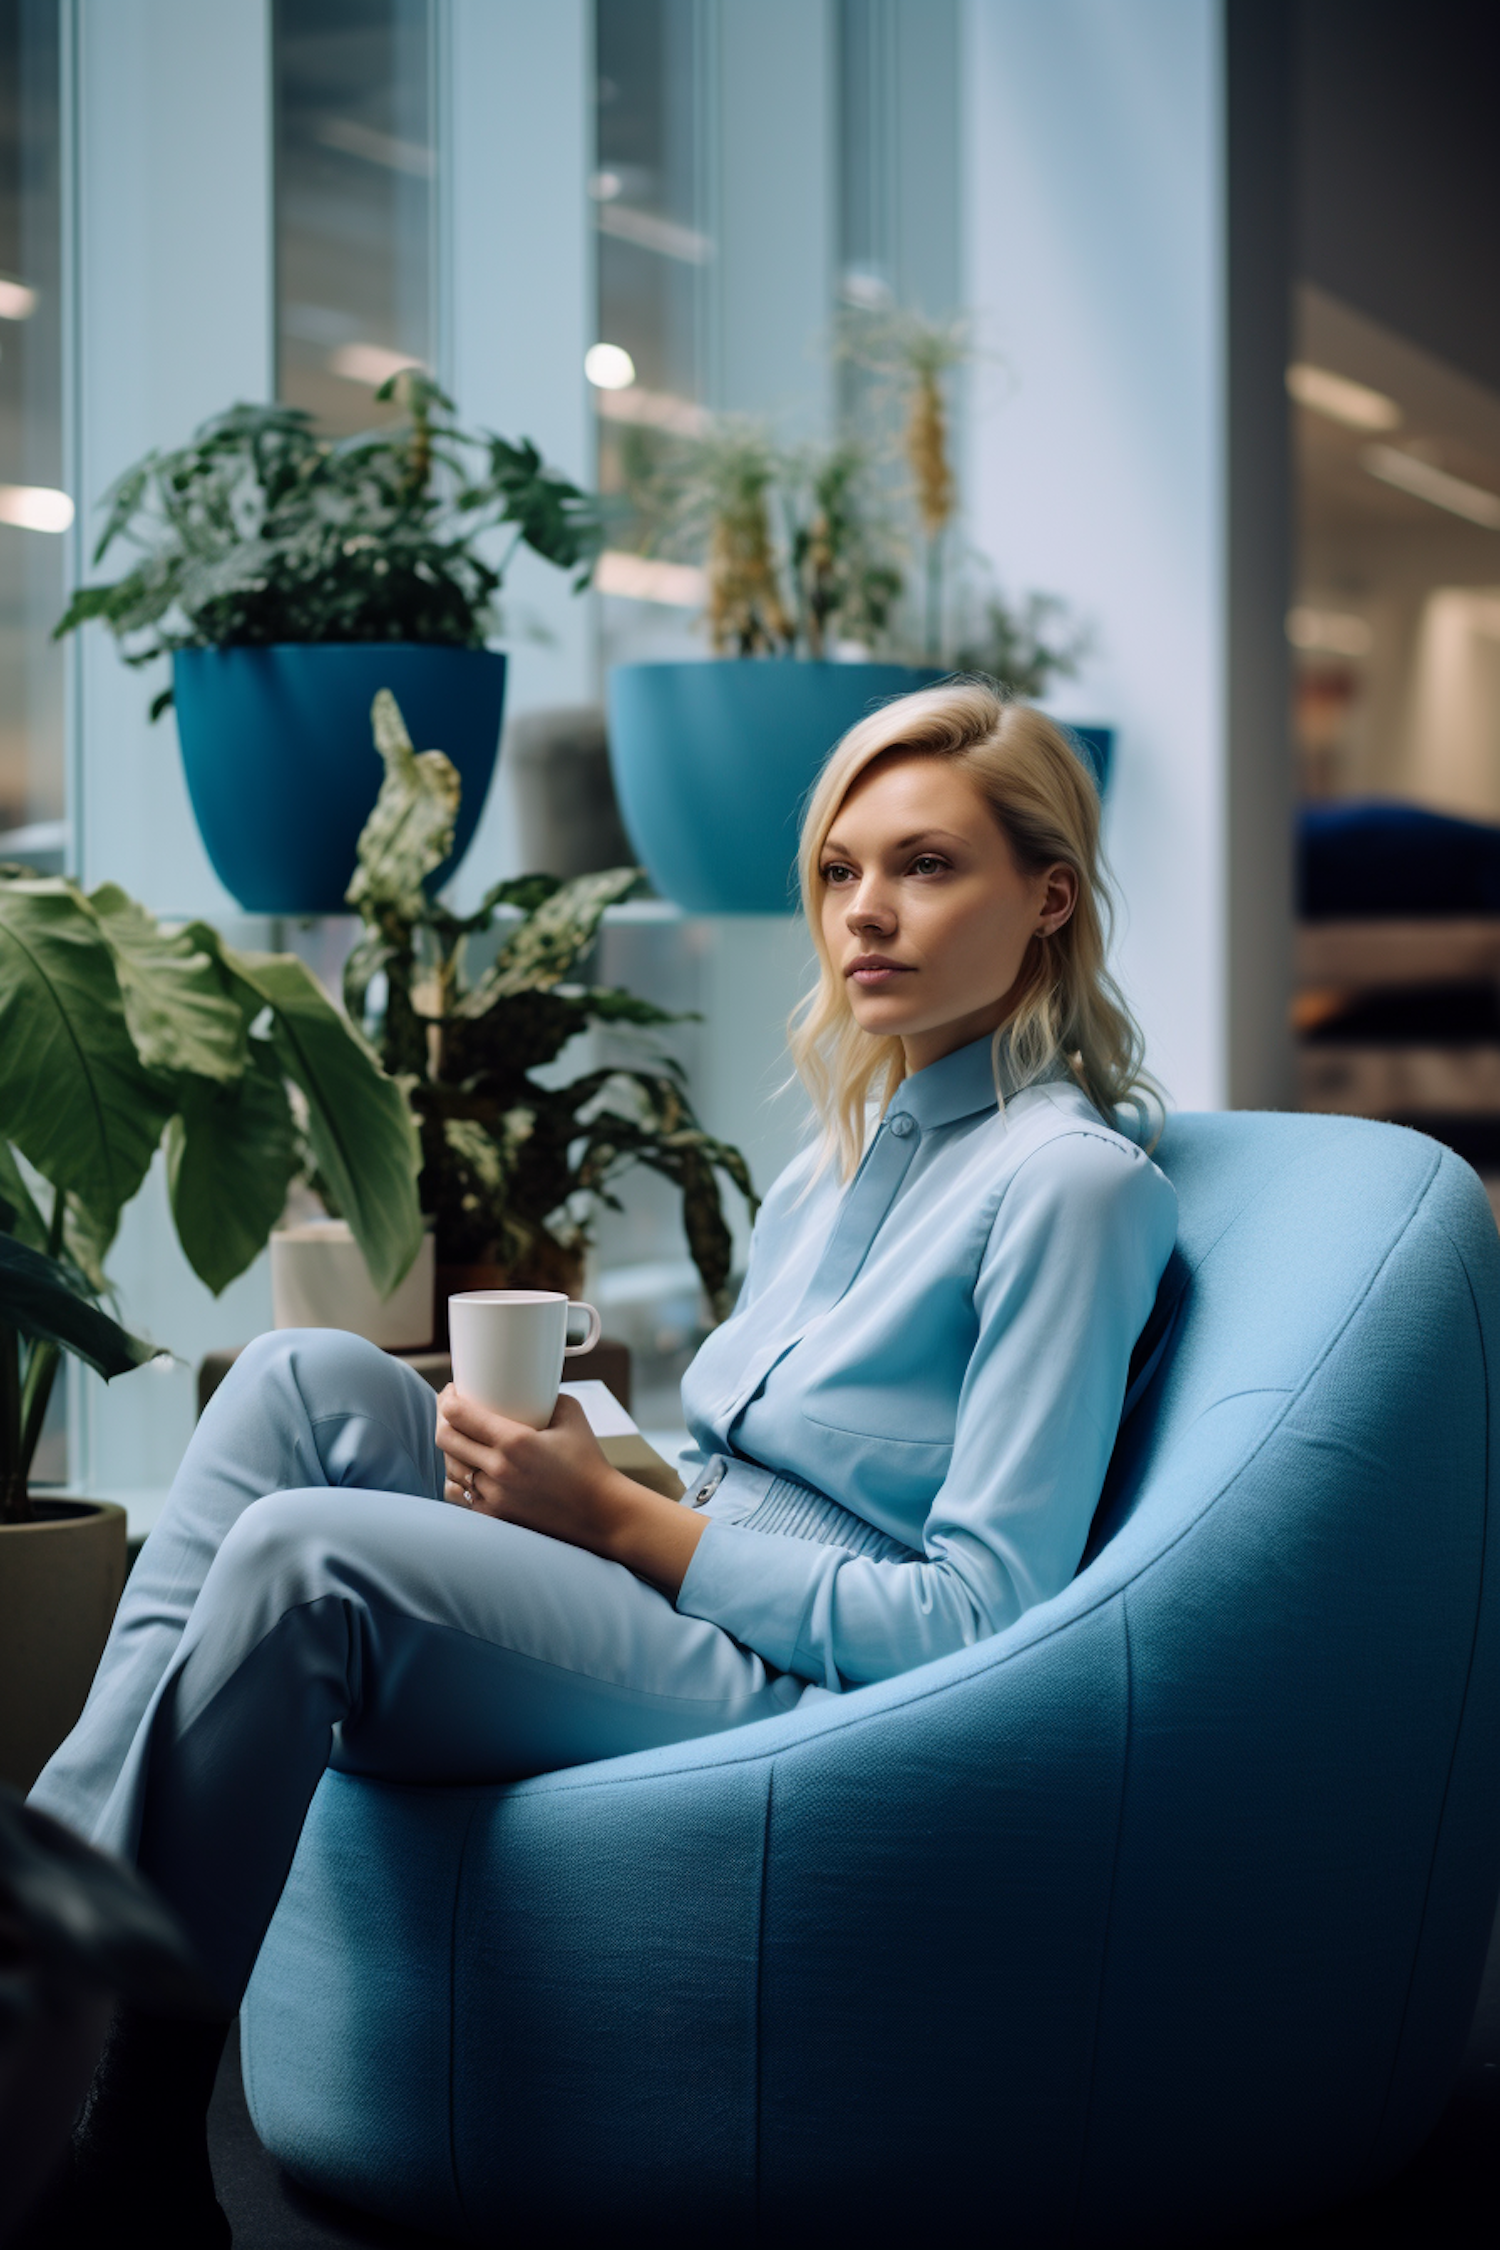 Serenity in Blue: Contemplative Woman in Modern Corporate Setting